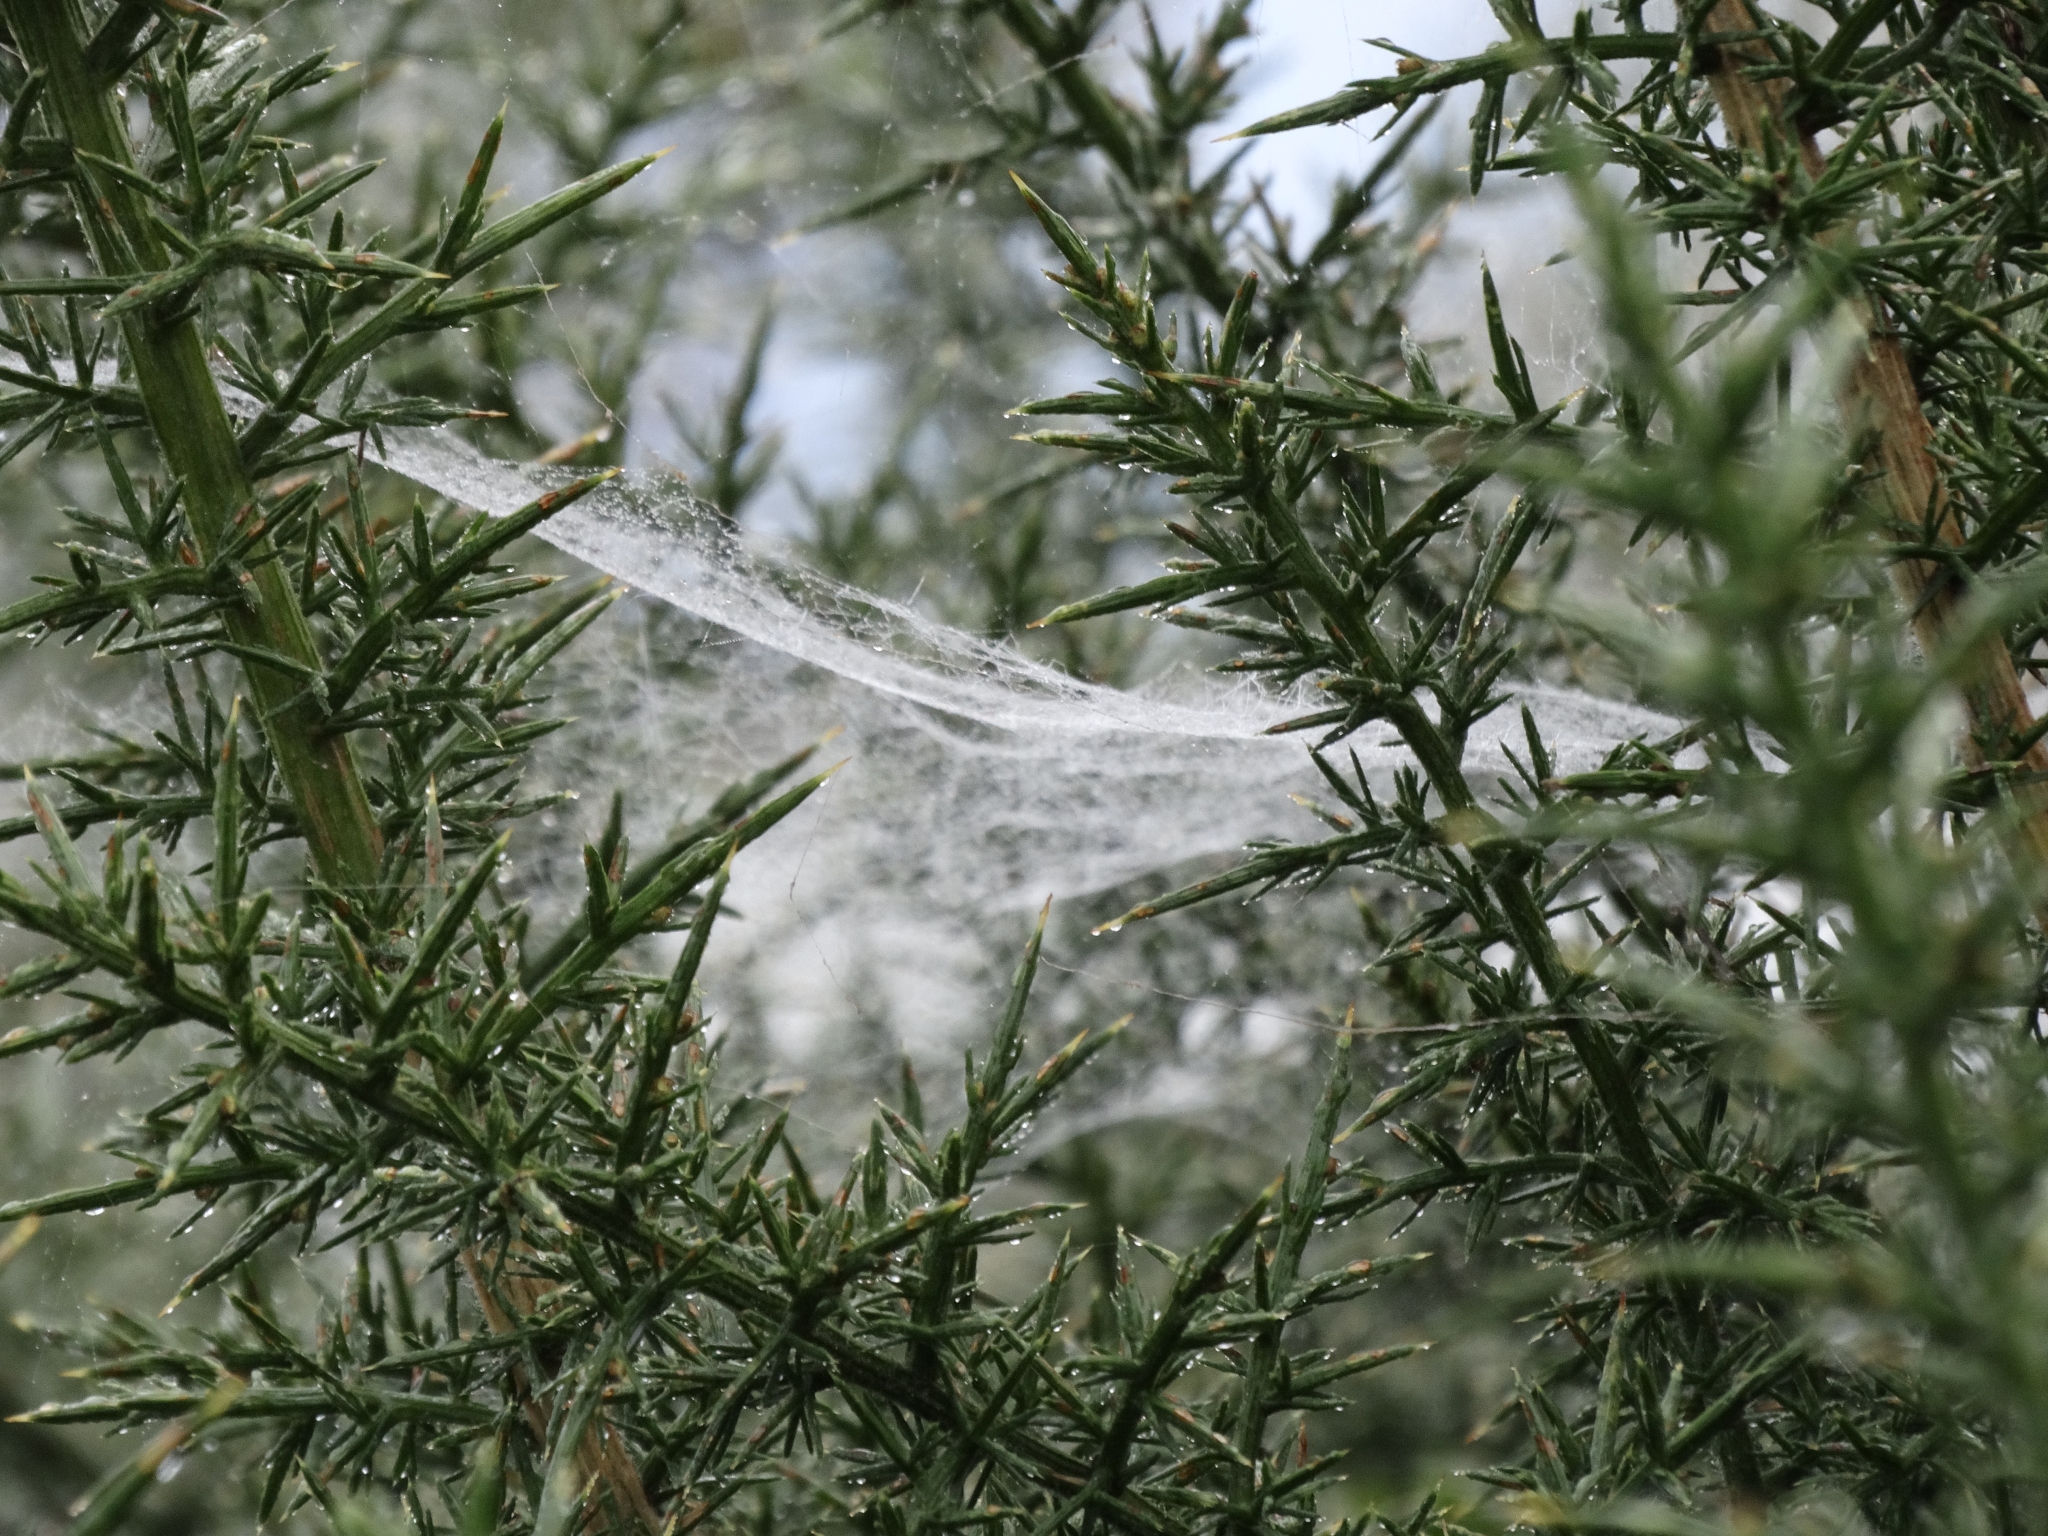 A photo from the FoTF Conservation Event - October 2019 - Gorse Clearance at Hockham Hills & Holes : A spiders web between branches on a Gorse Bush